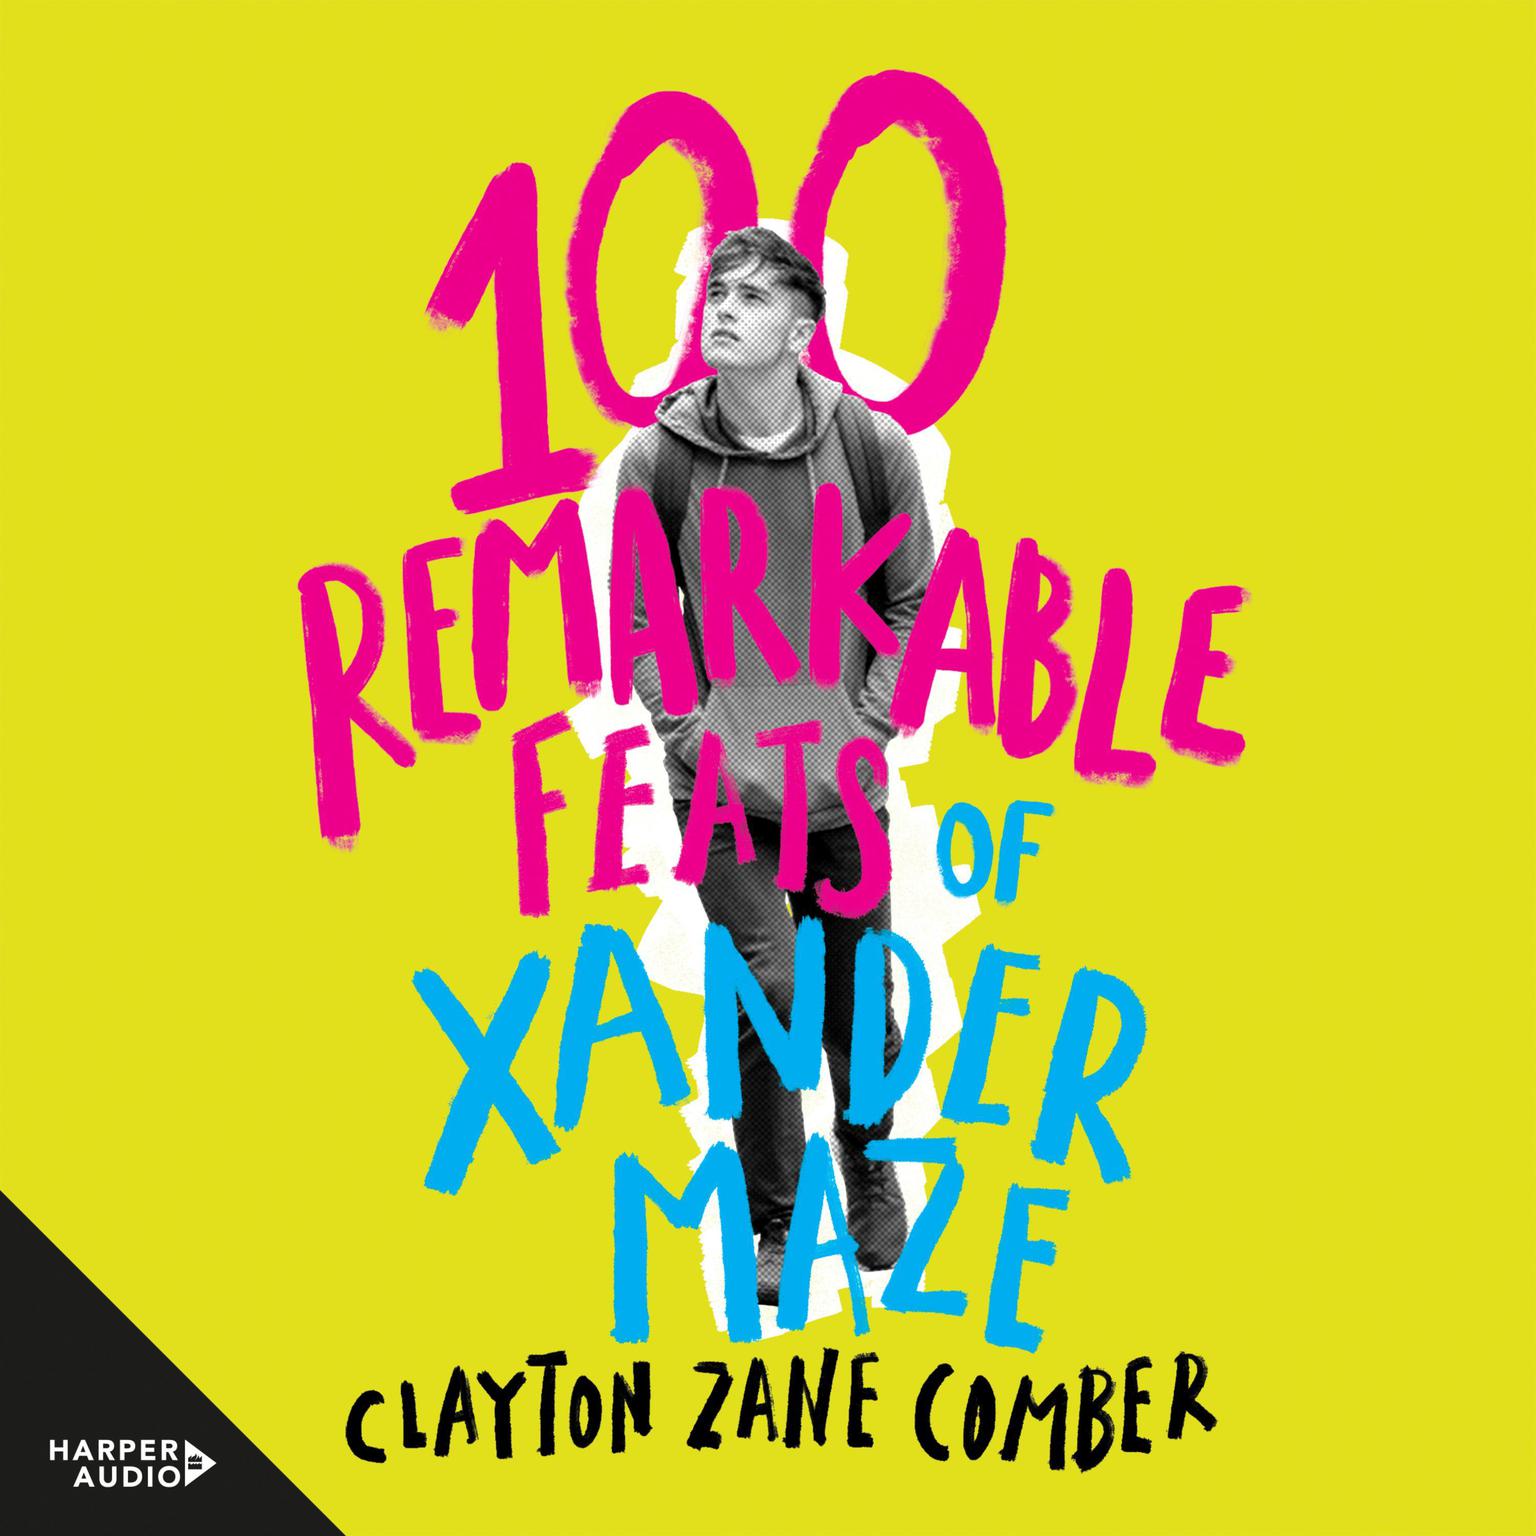 100 Remarkable Feats of Xander Maze Audiobook, by Clayton Zane Comber